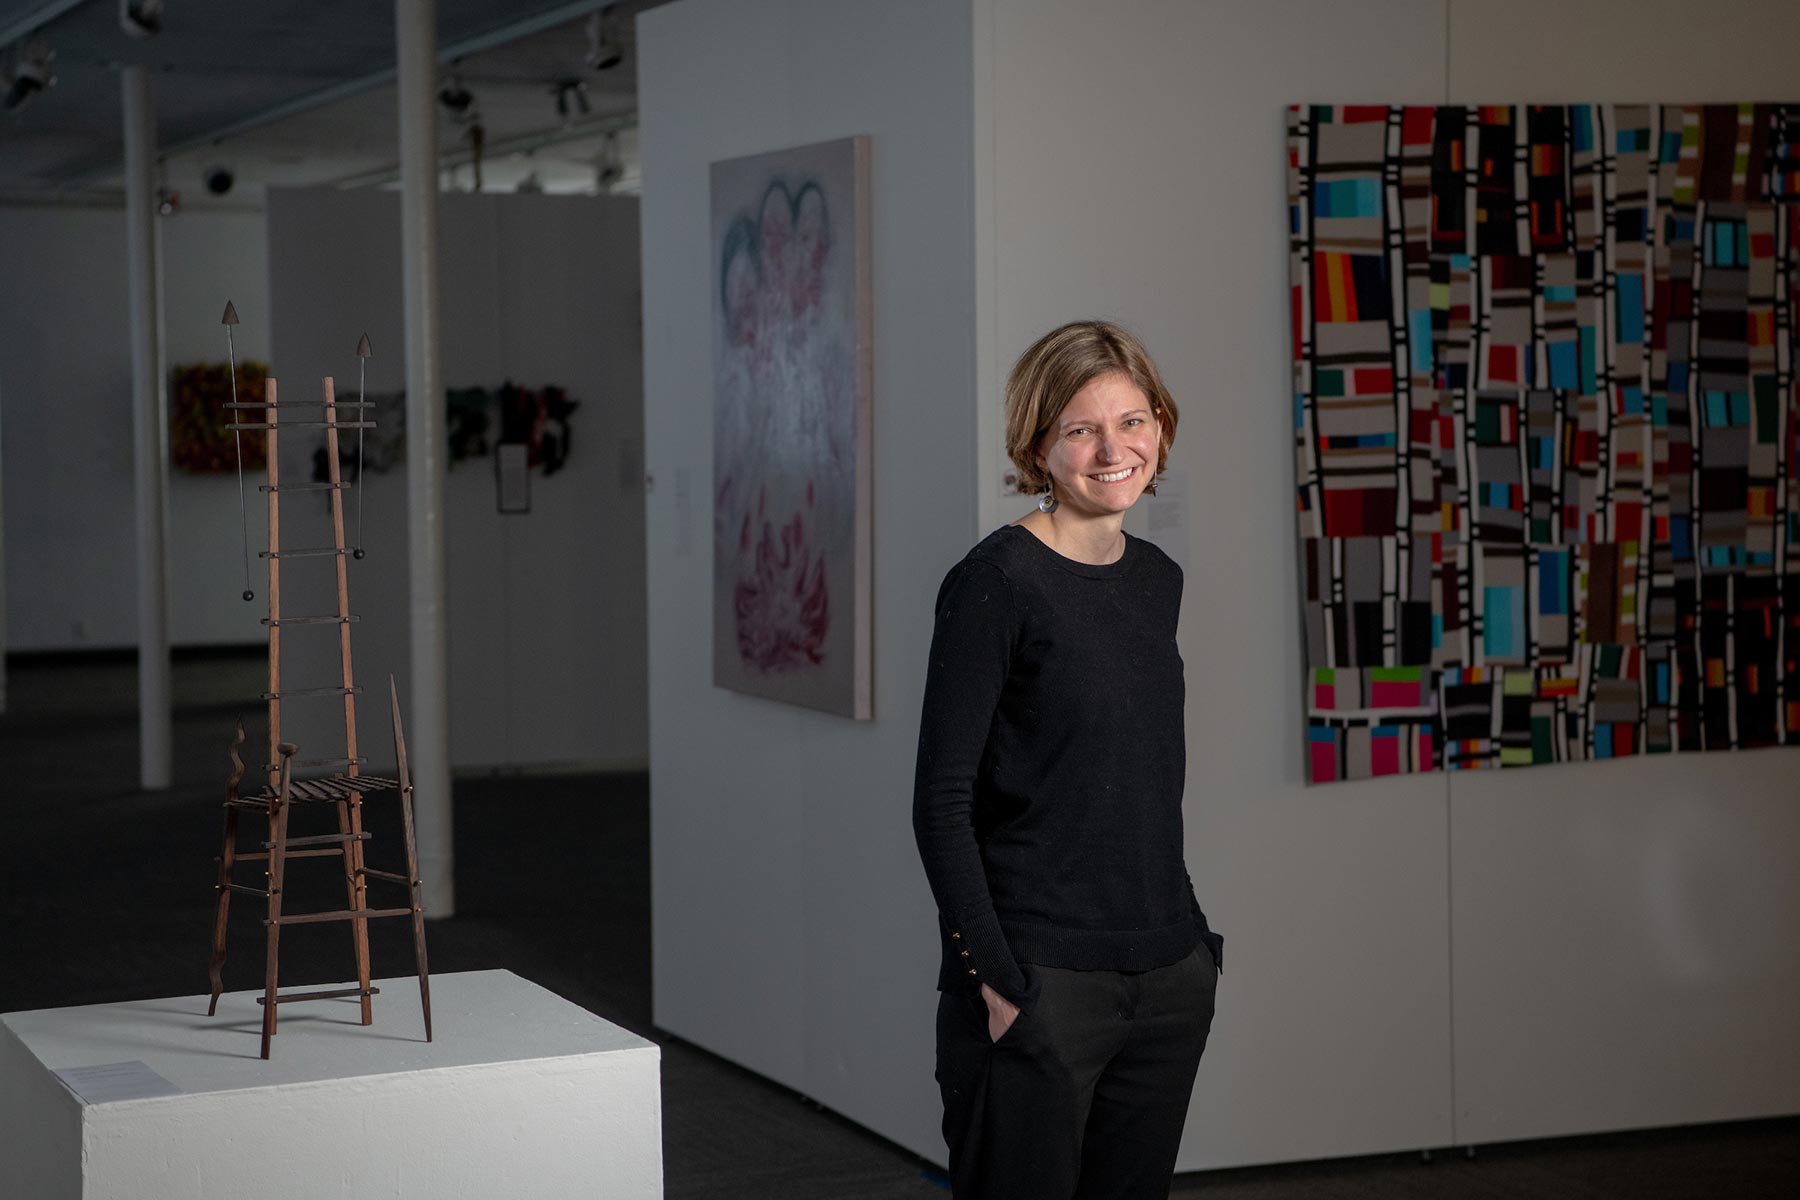 Leah Magyary standing in an art gallery